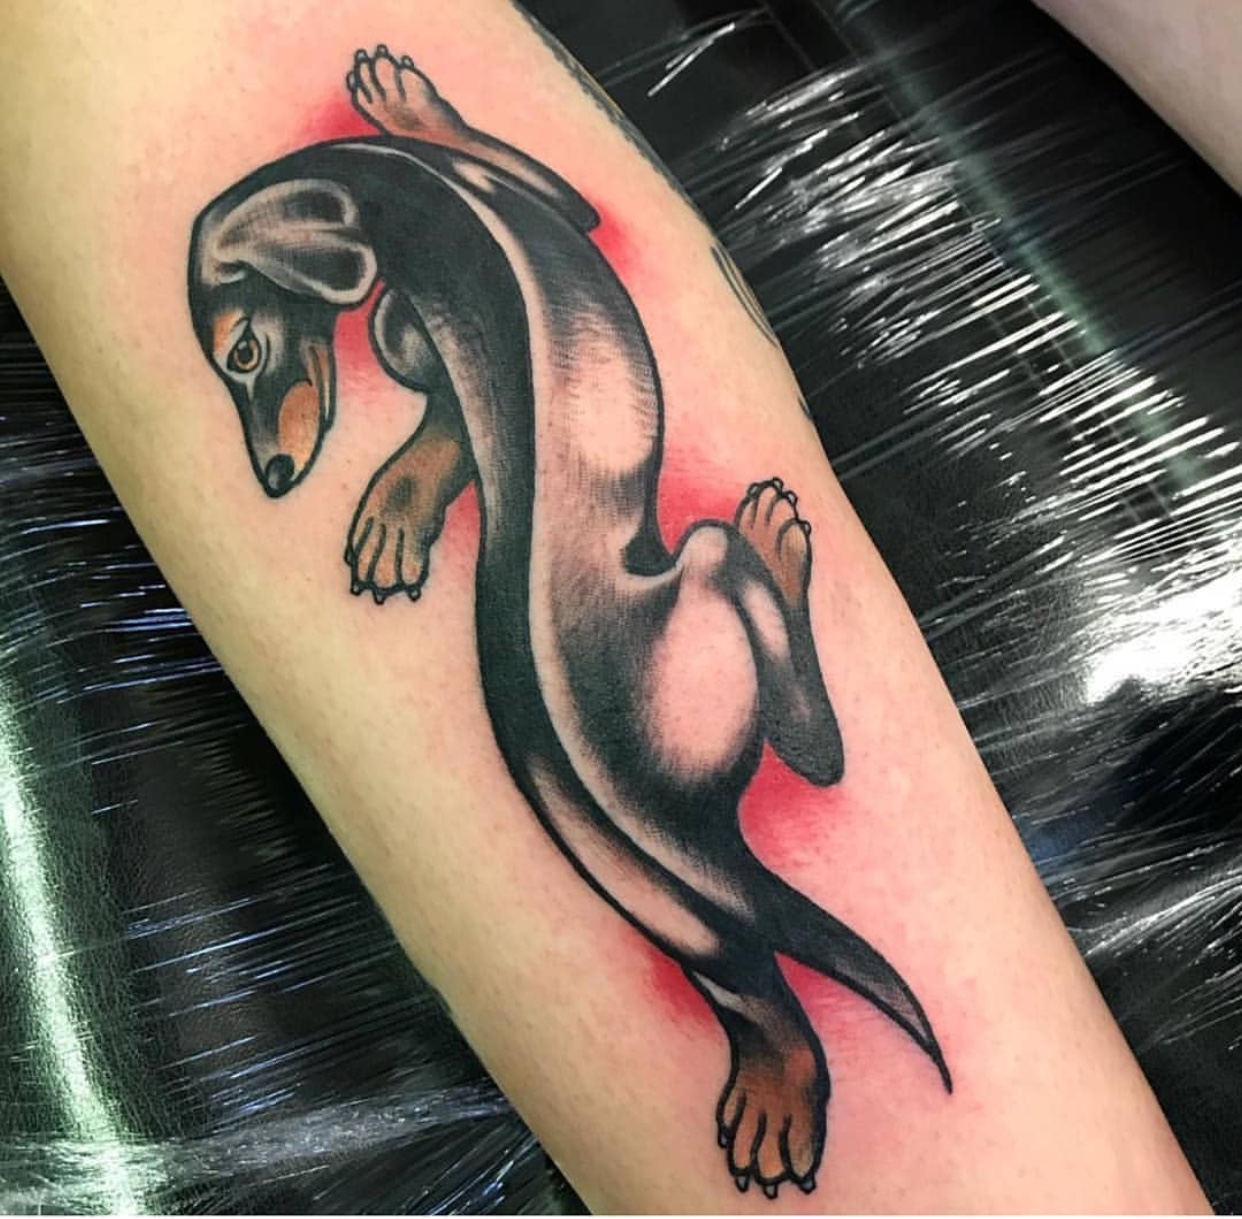 15 Chic Tattoo Designs for Dachshund Fans - The Paws